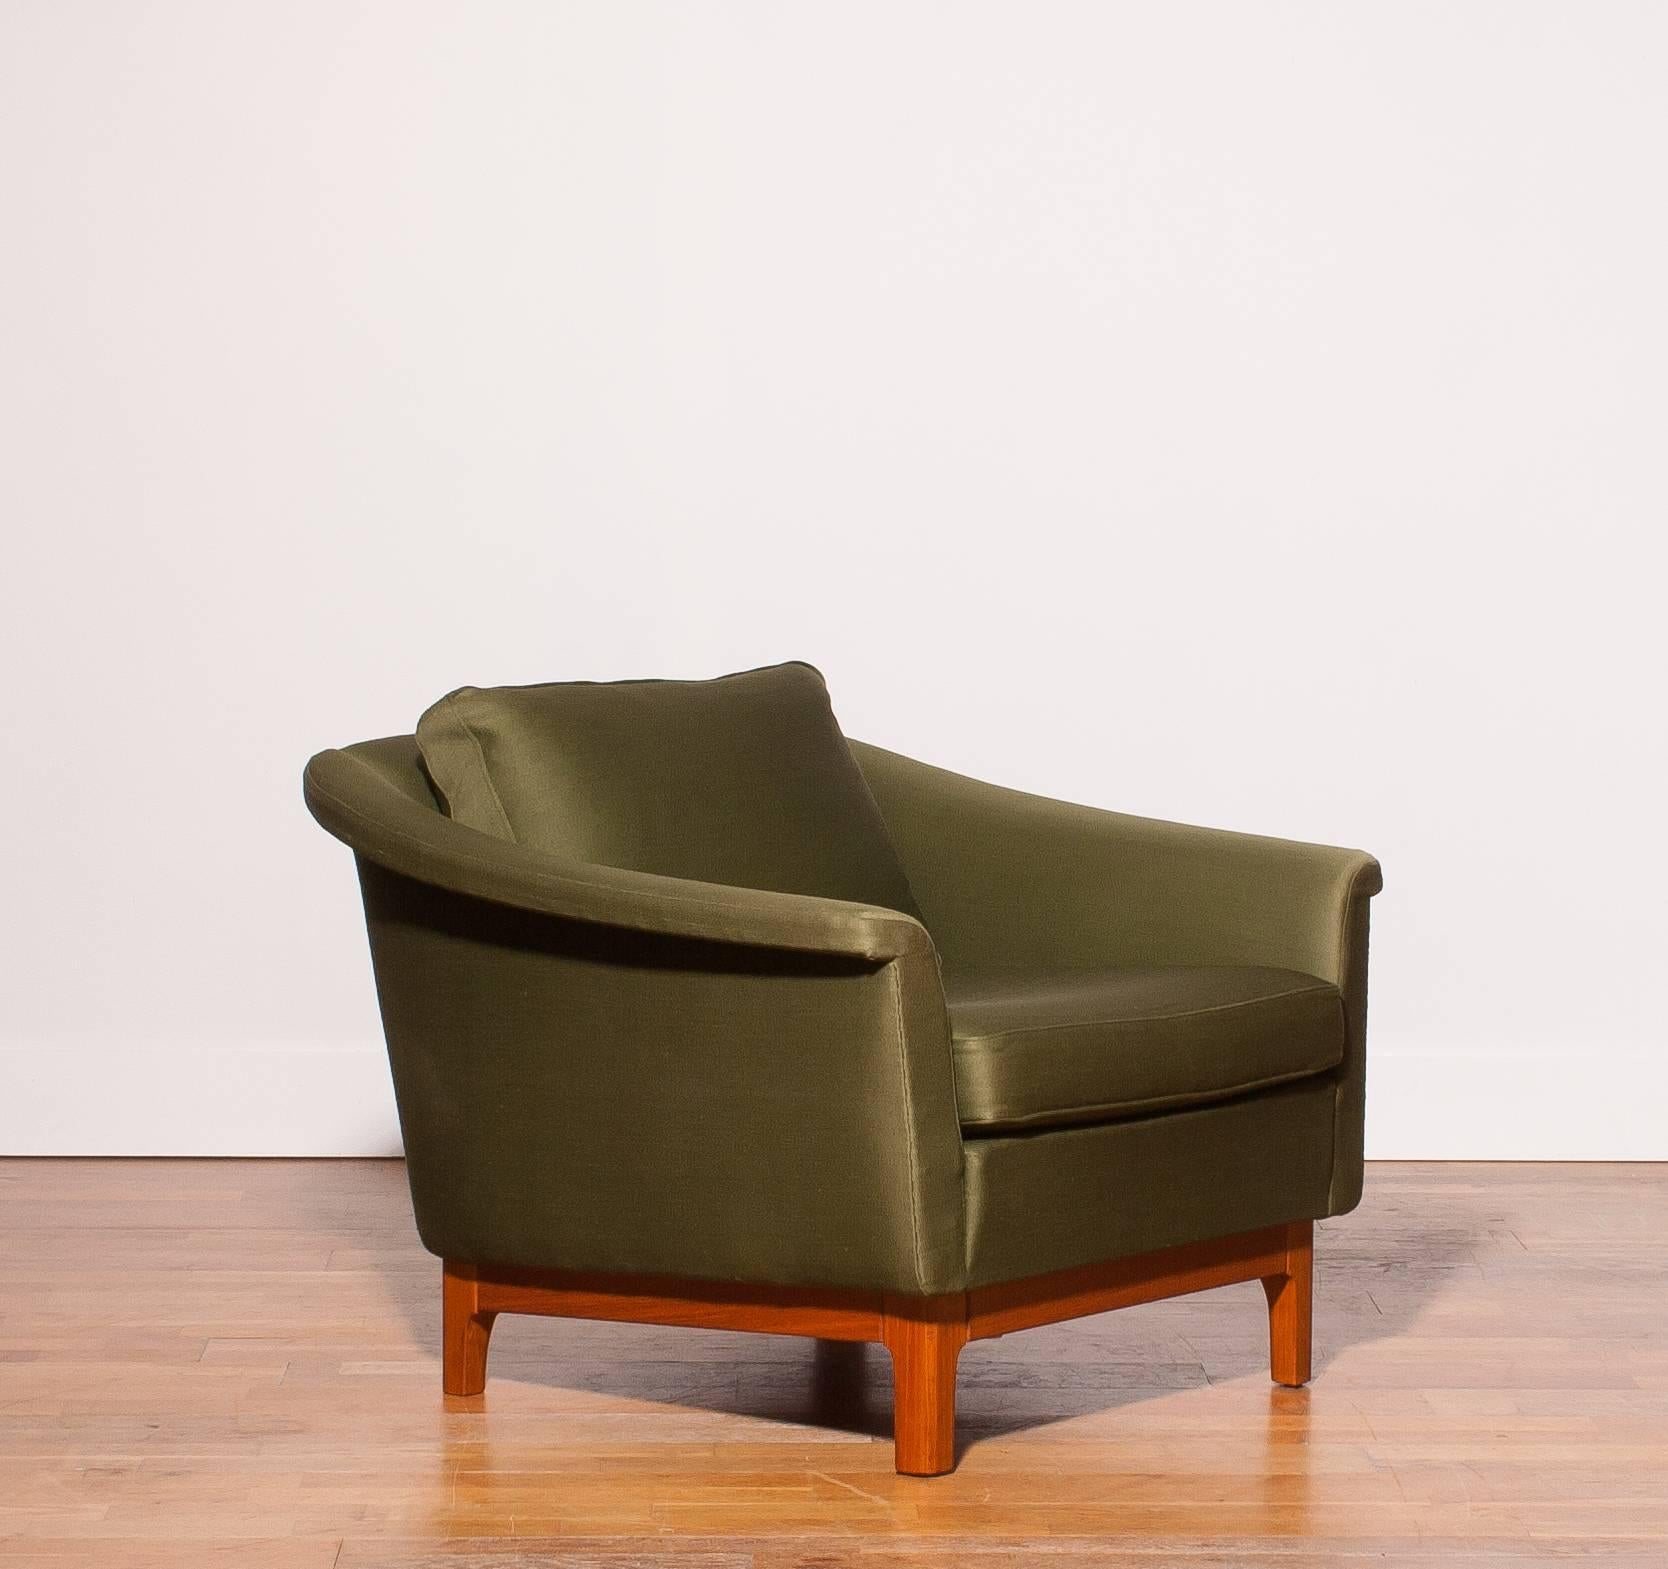 1960s, Green Lounge Chair by Folke Ohlsson for DUX. 3